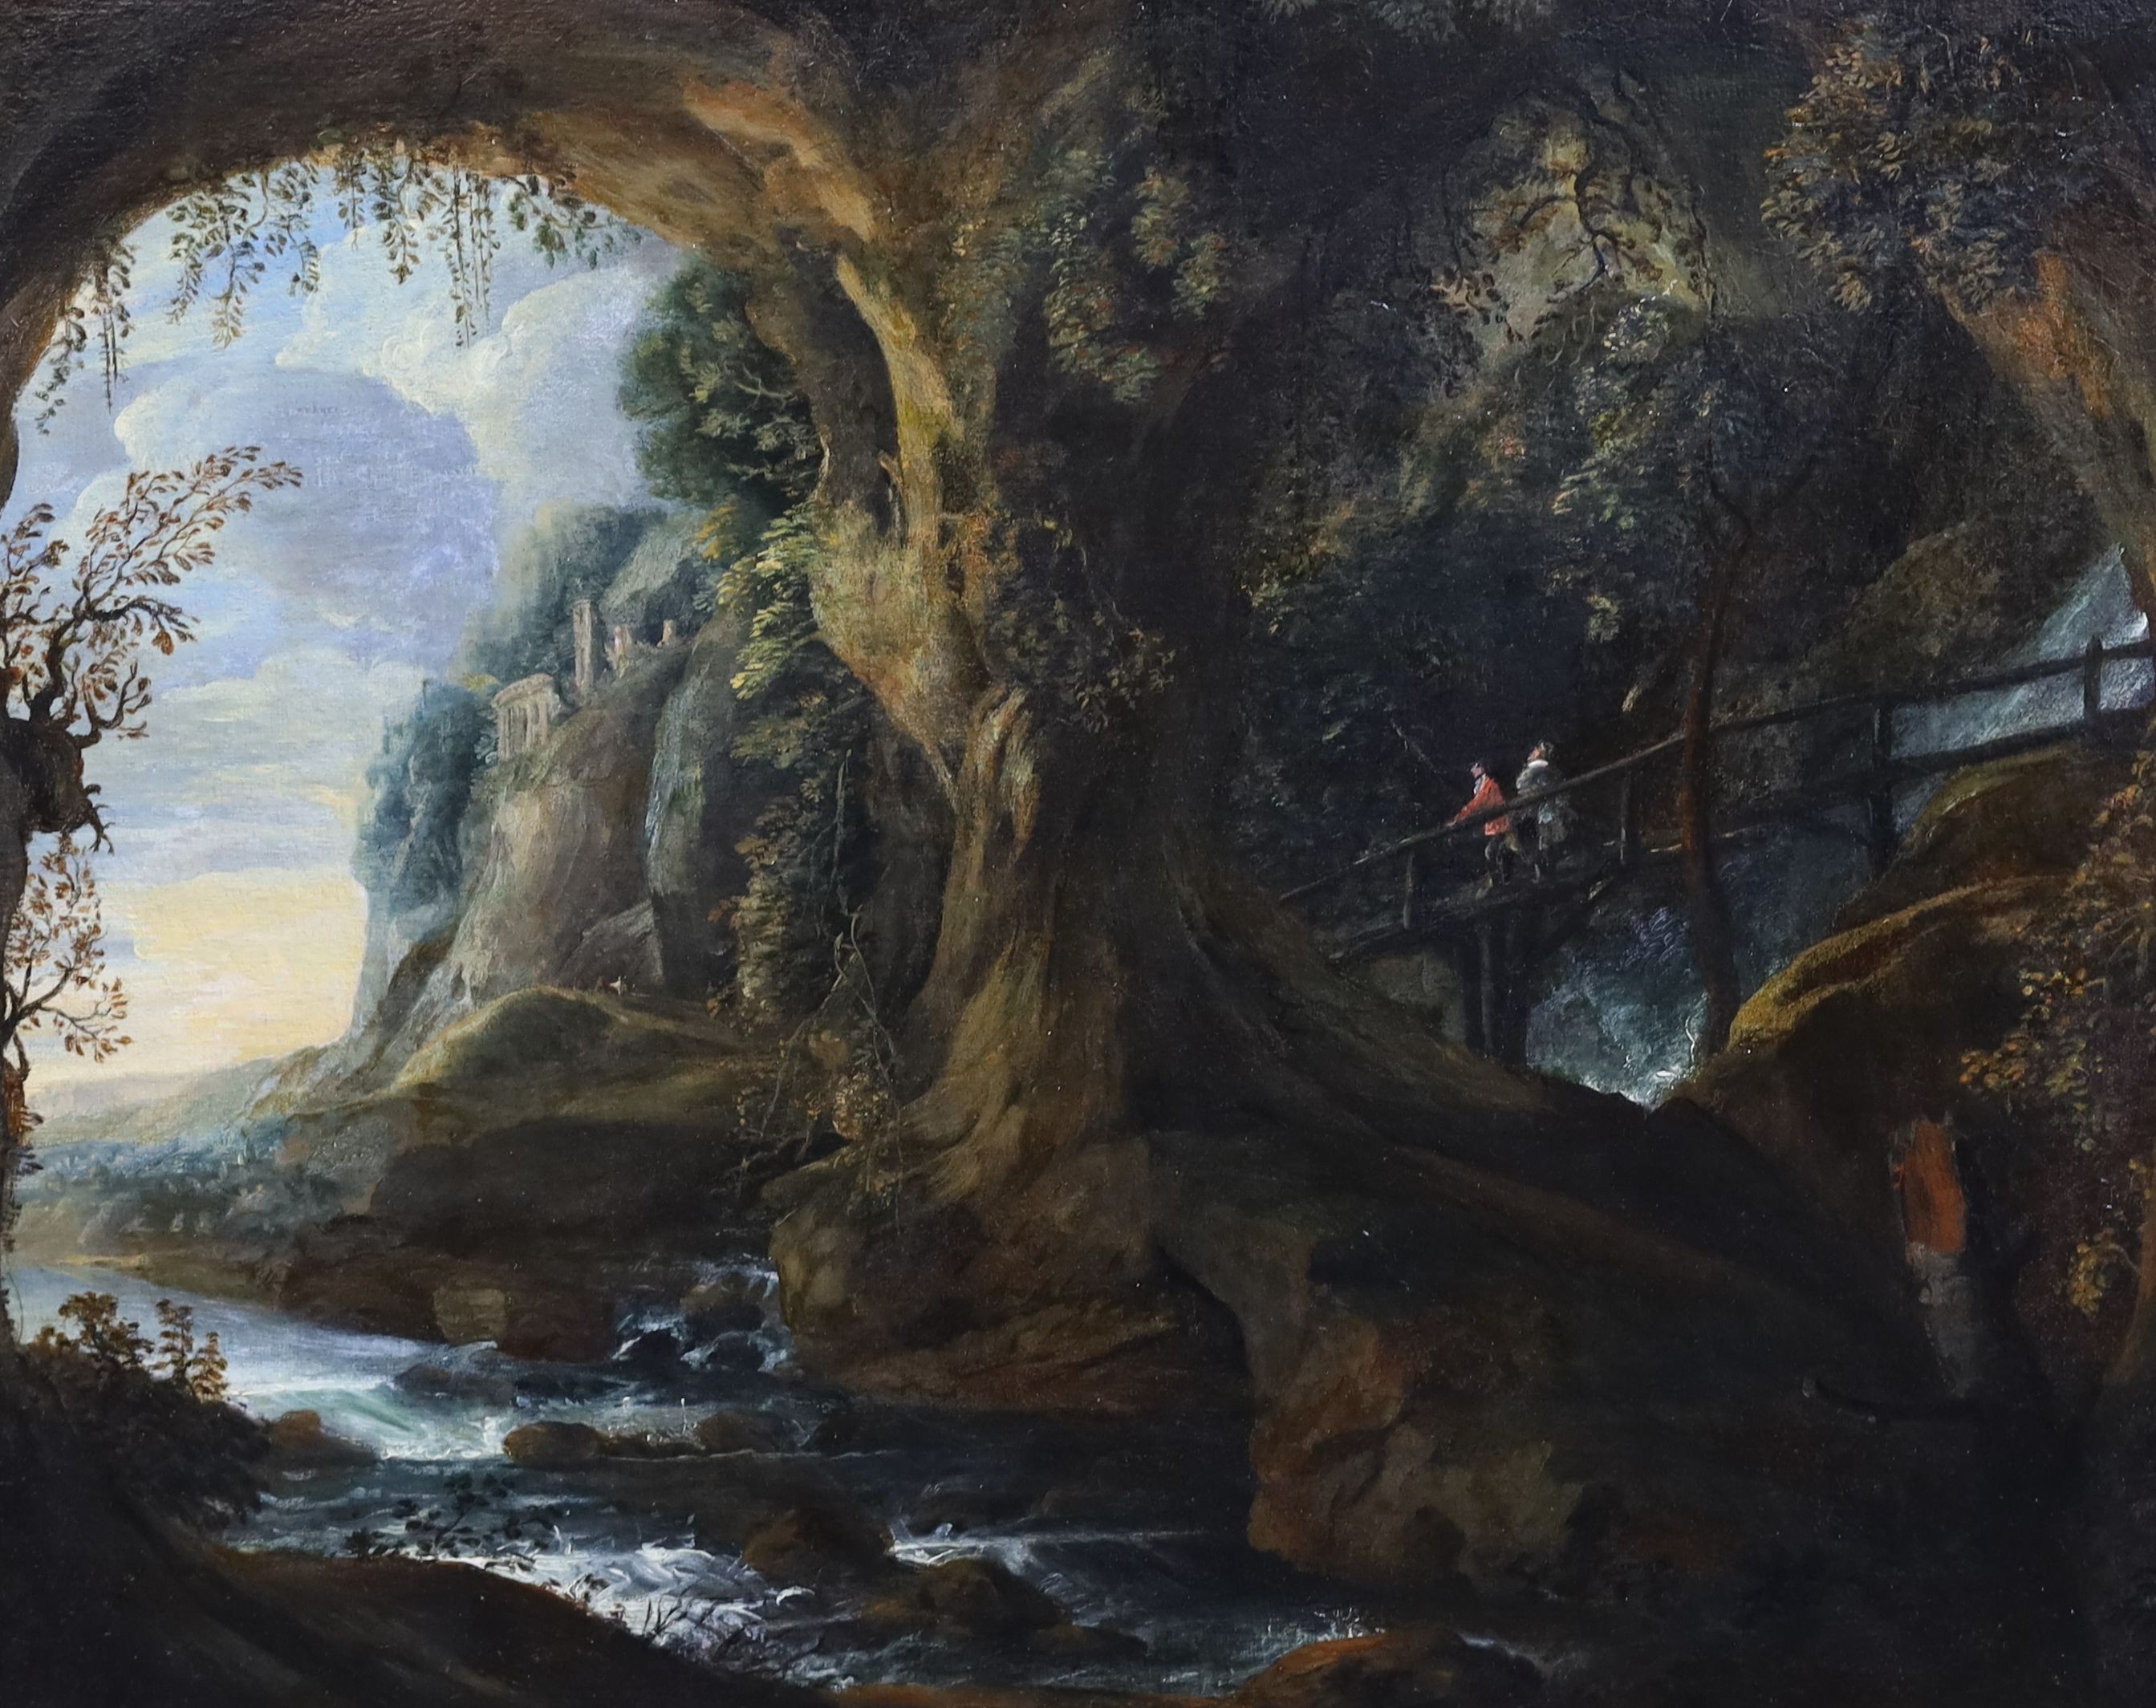 Early 19th century Italian School, Travellers looking out from a grotto, oil on canvas, 57 x 71cm